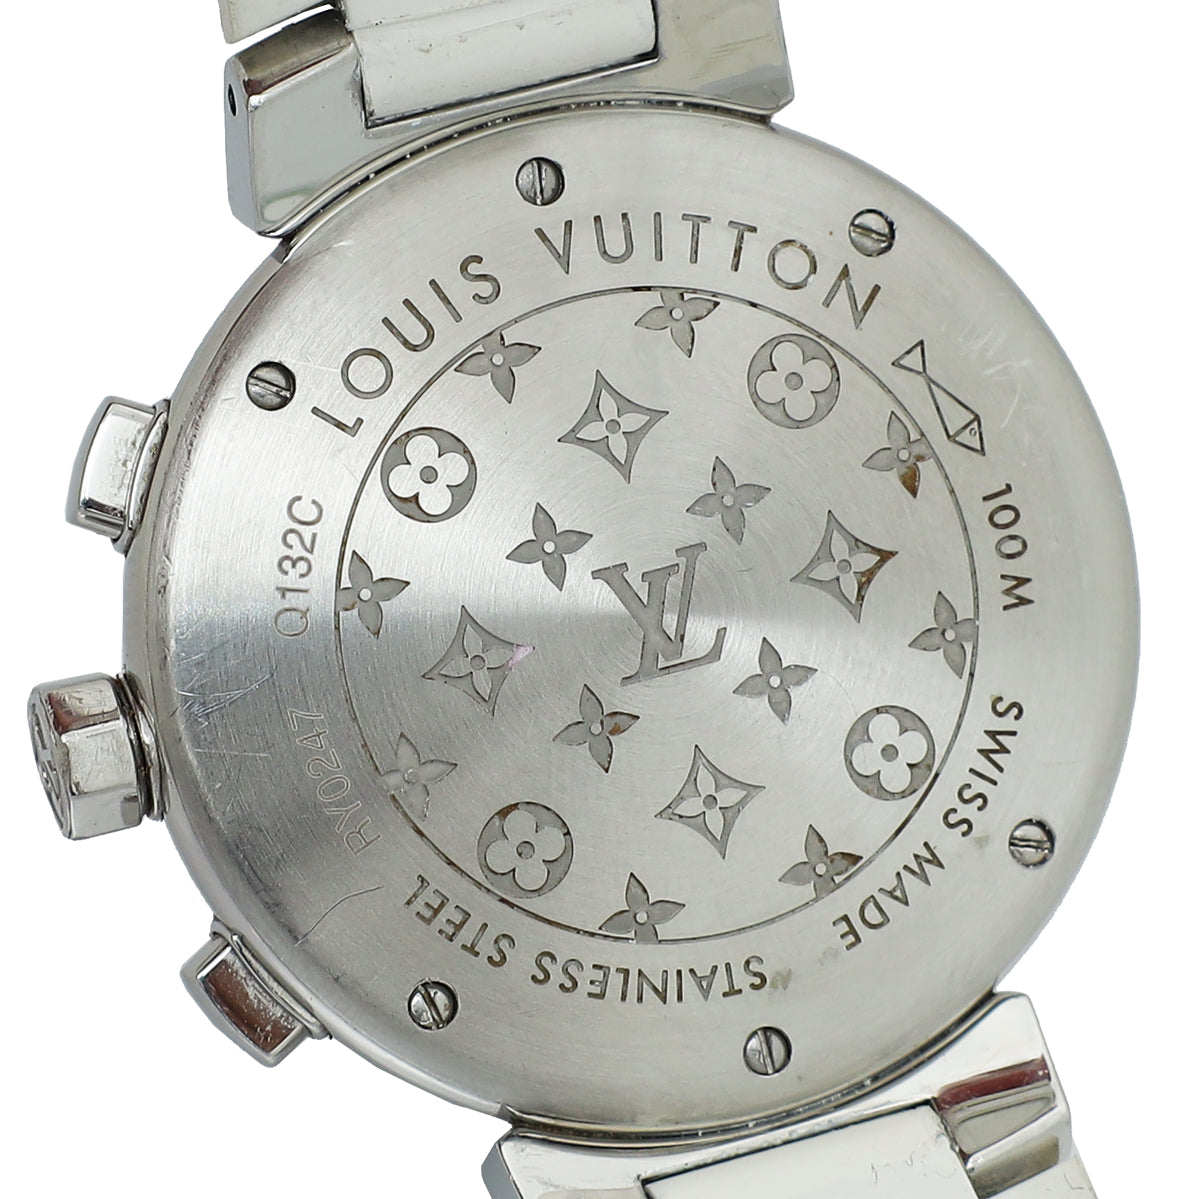 Load image into Gallery viewer, Louis Vuitton ST.ST Tambour Lovely Cup Flyback Chronograph 34mm Automatic Watch
